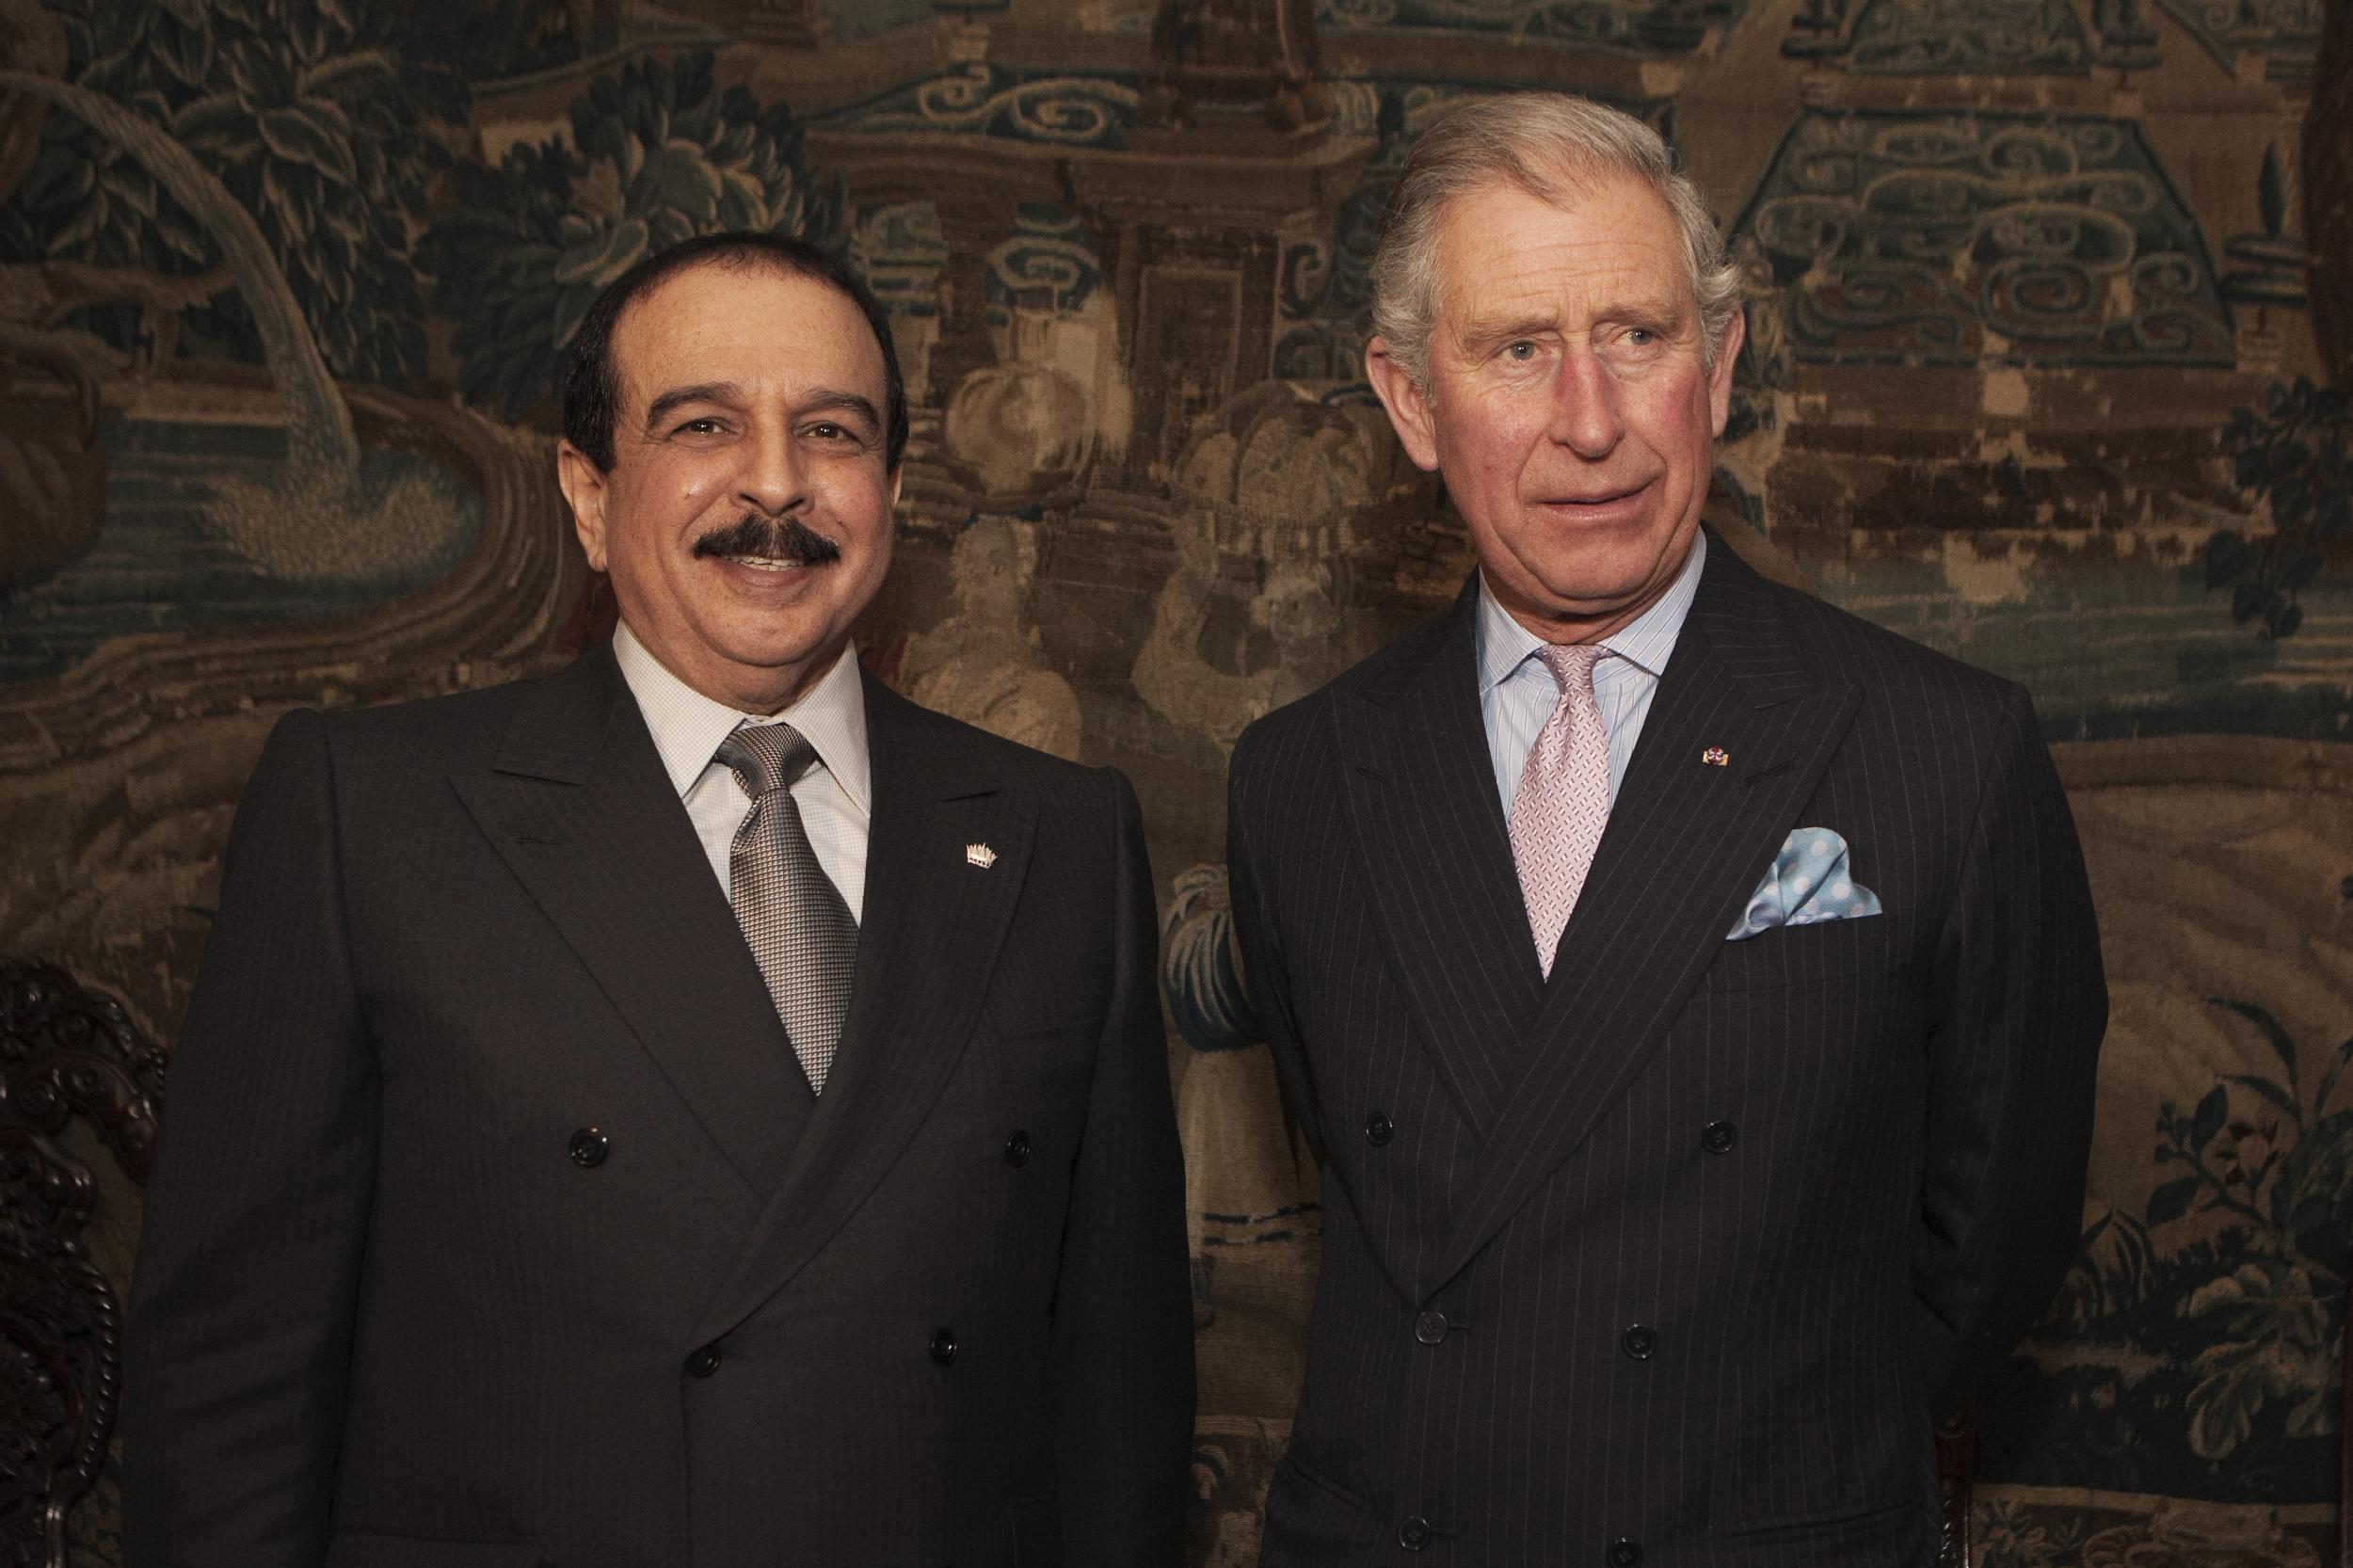 The Prince of Wales poses with Bahrain's King Hamad bin Issa al-Khalifa at Clarence House in 2011